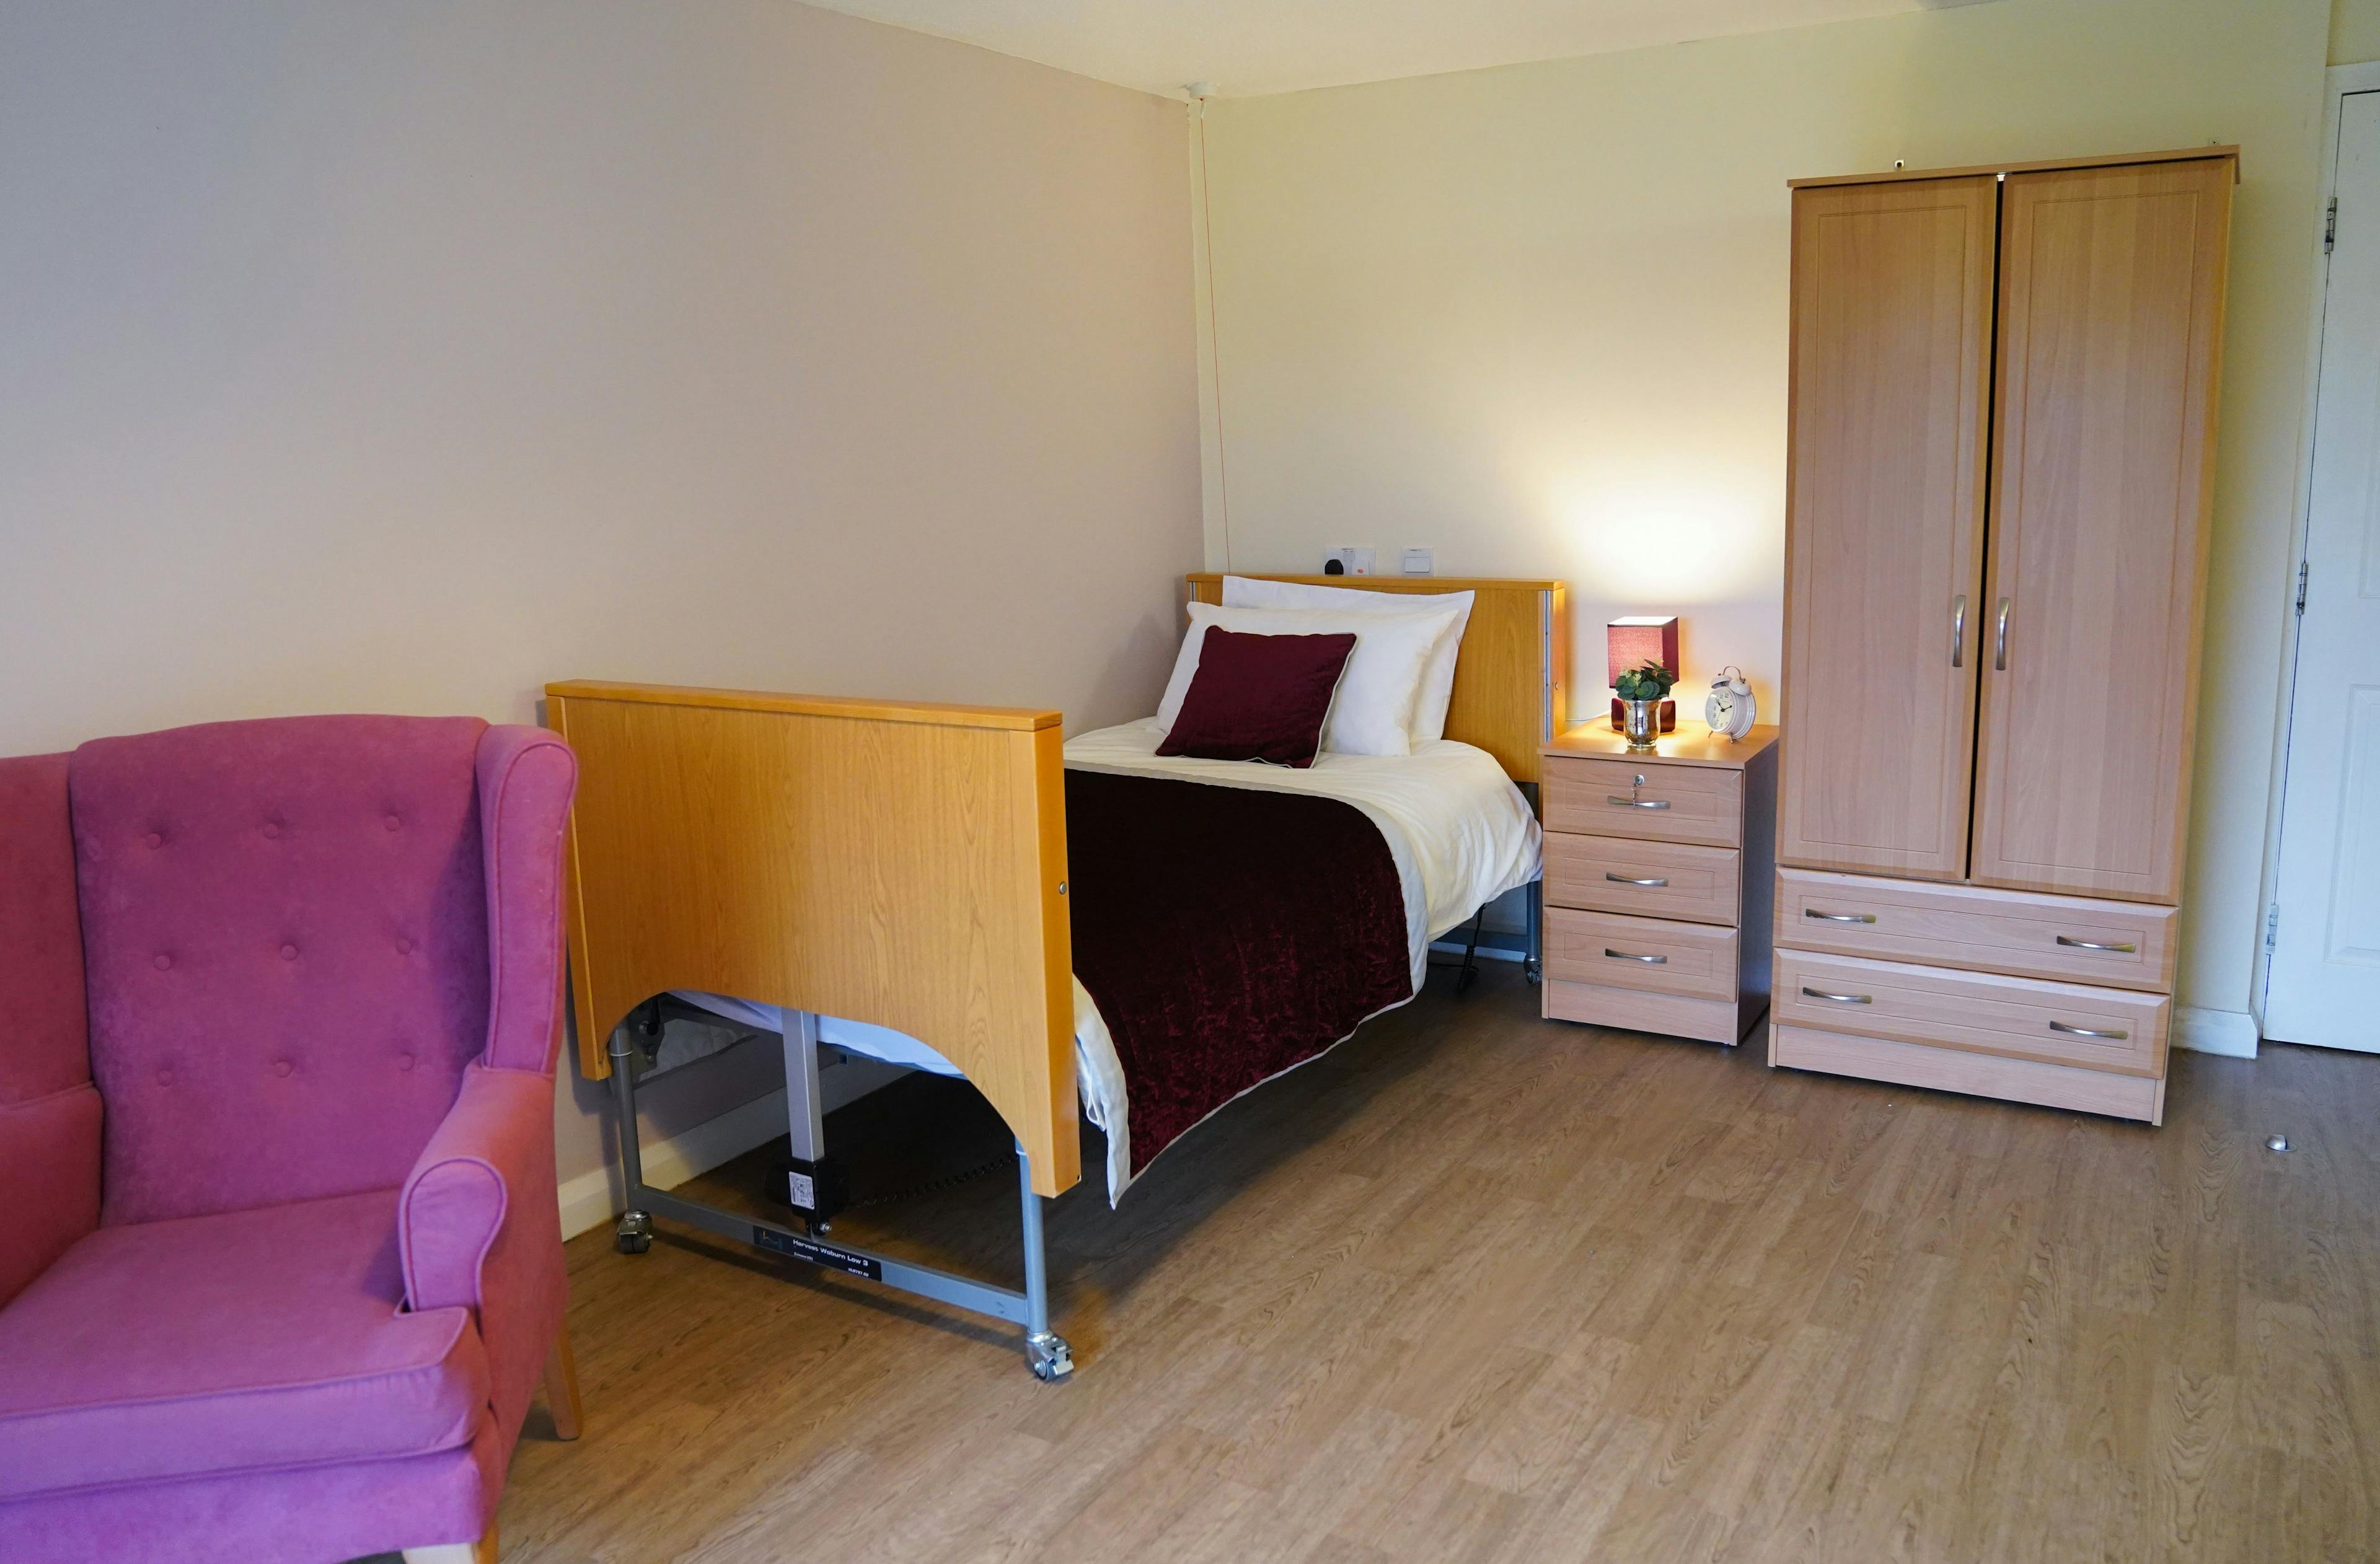 Bedroom at Bradwell Court Care Home in Congleton, Cheshire East